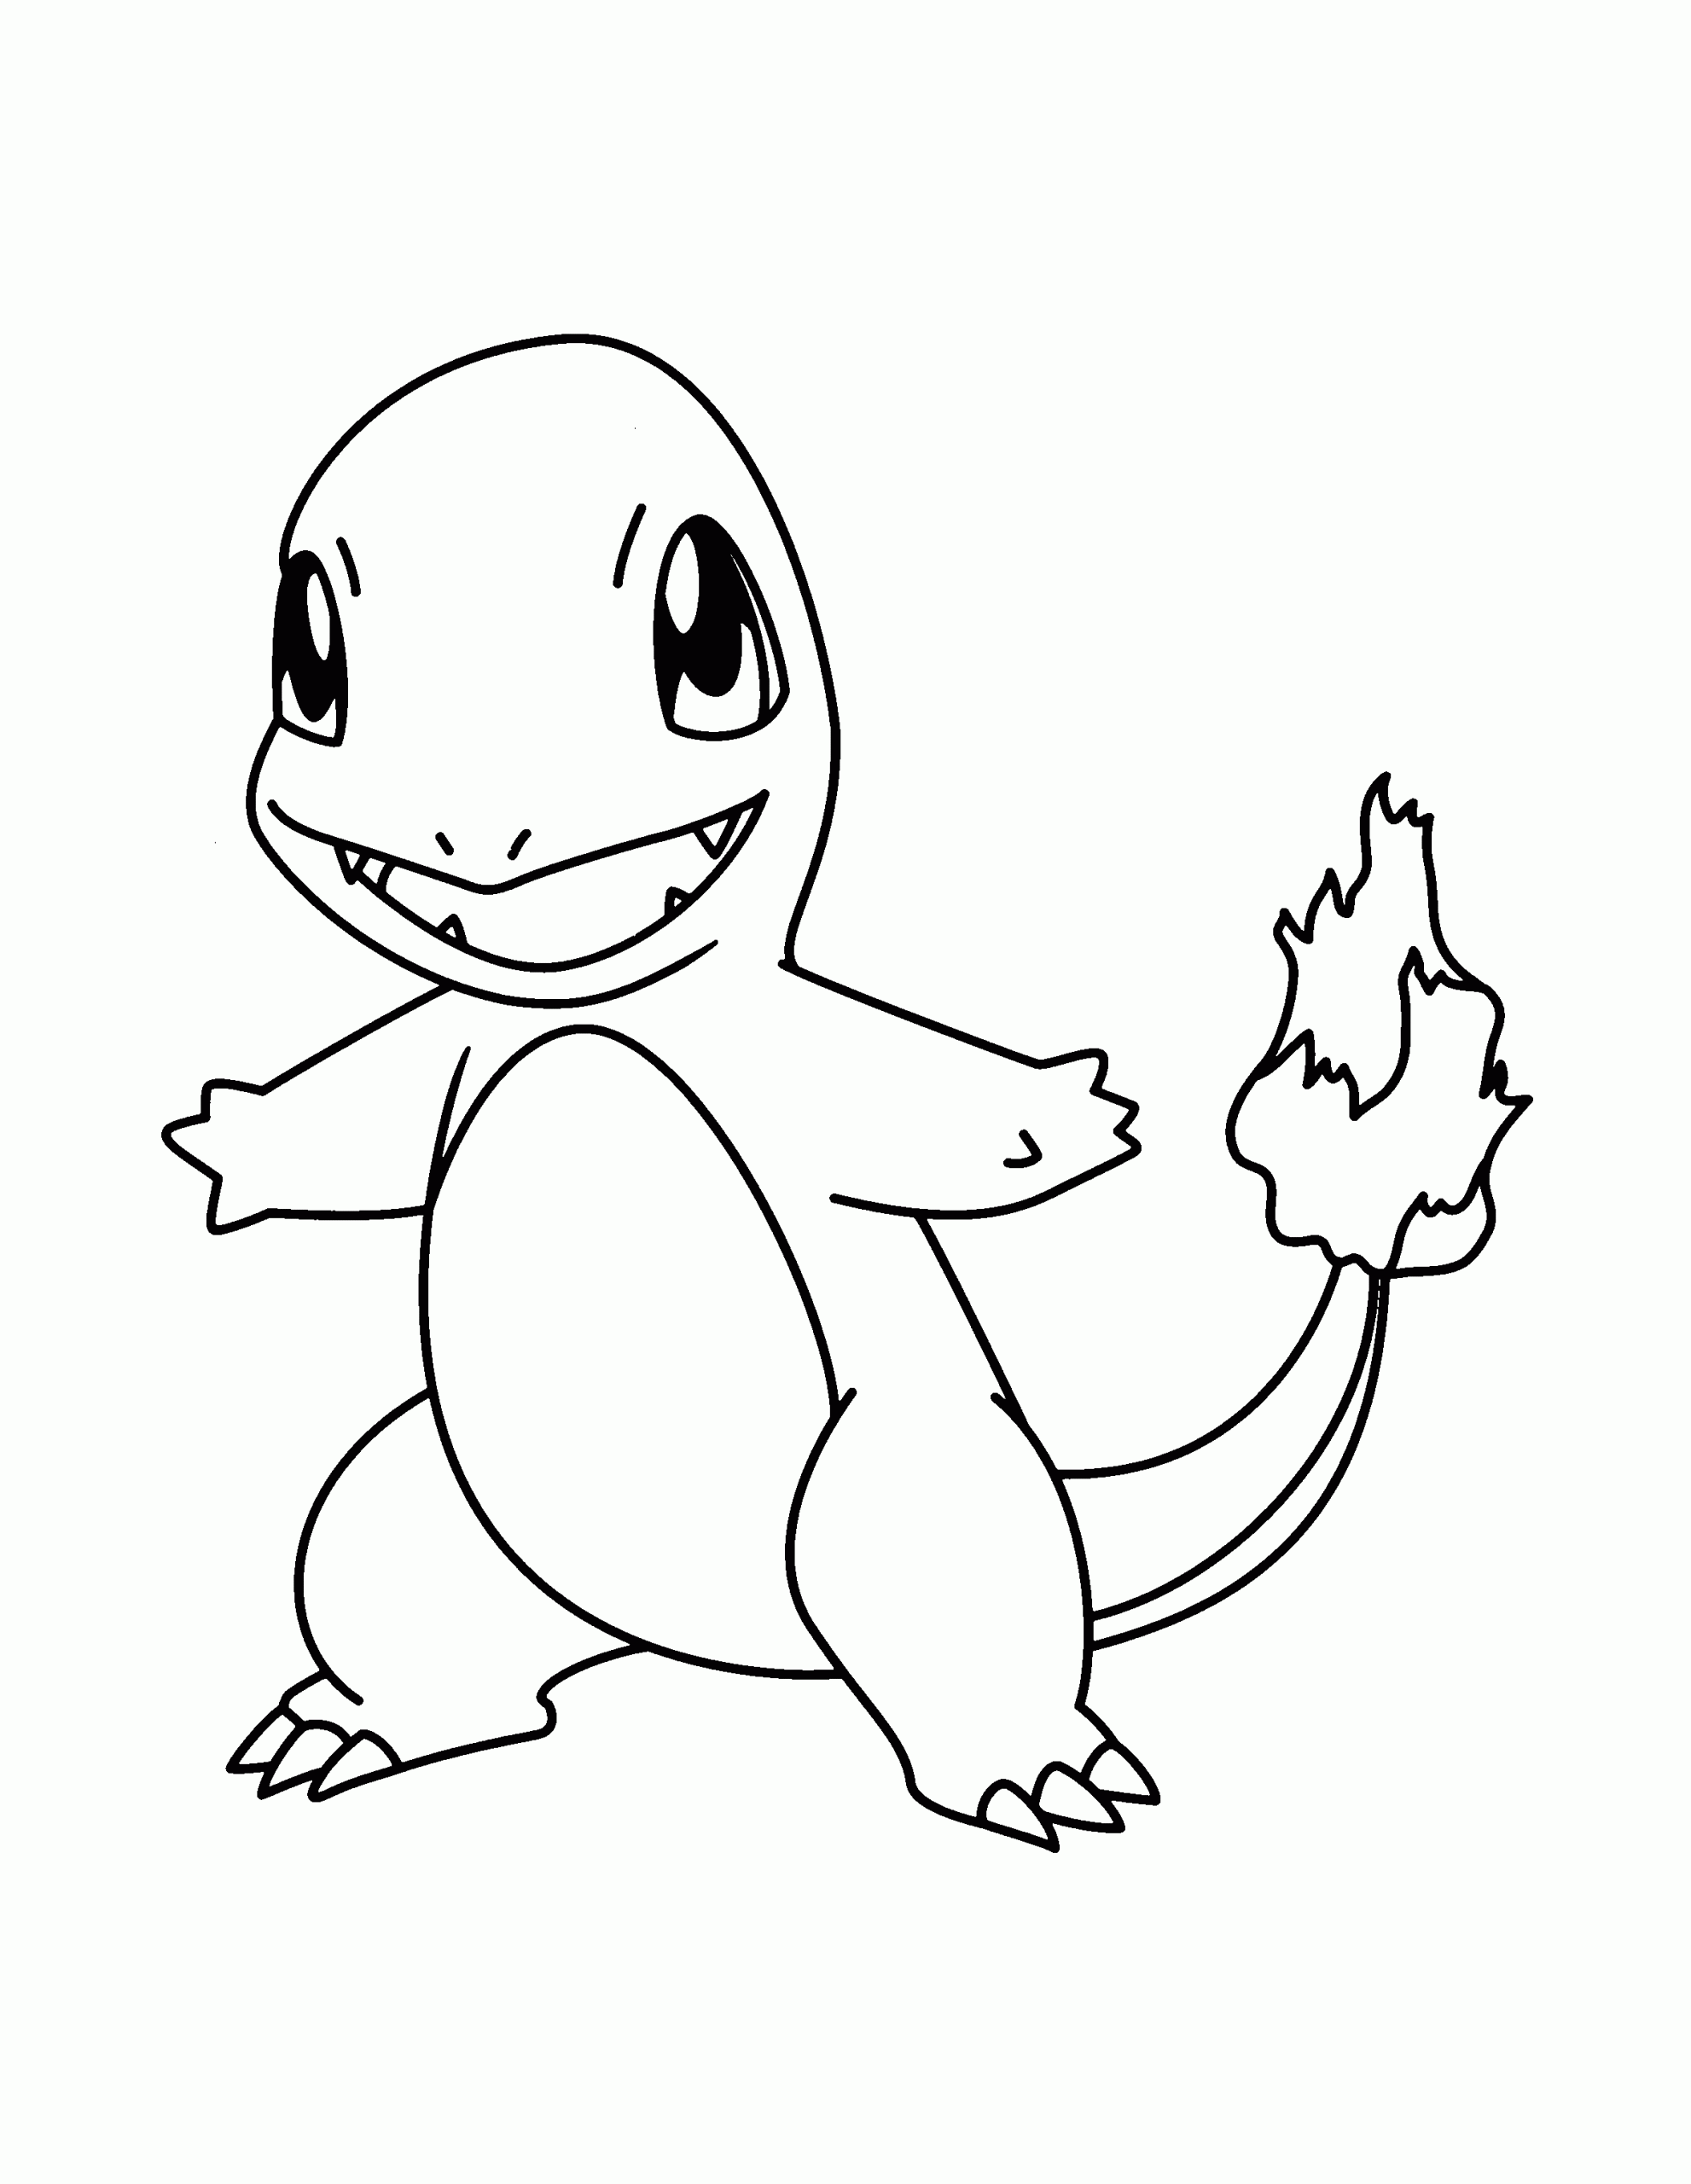 Charmander Artistic Coloring Page